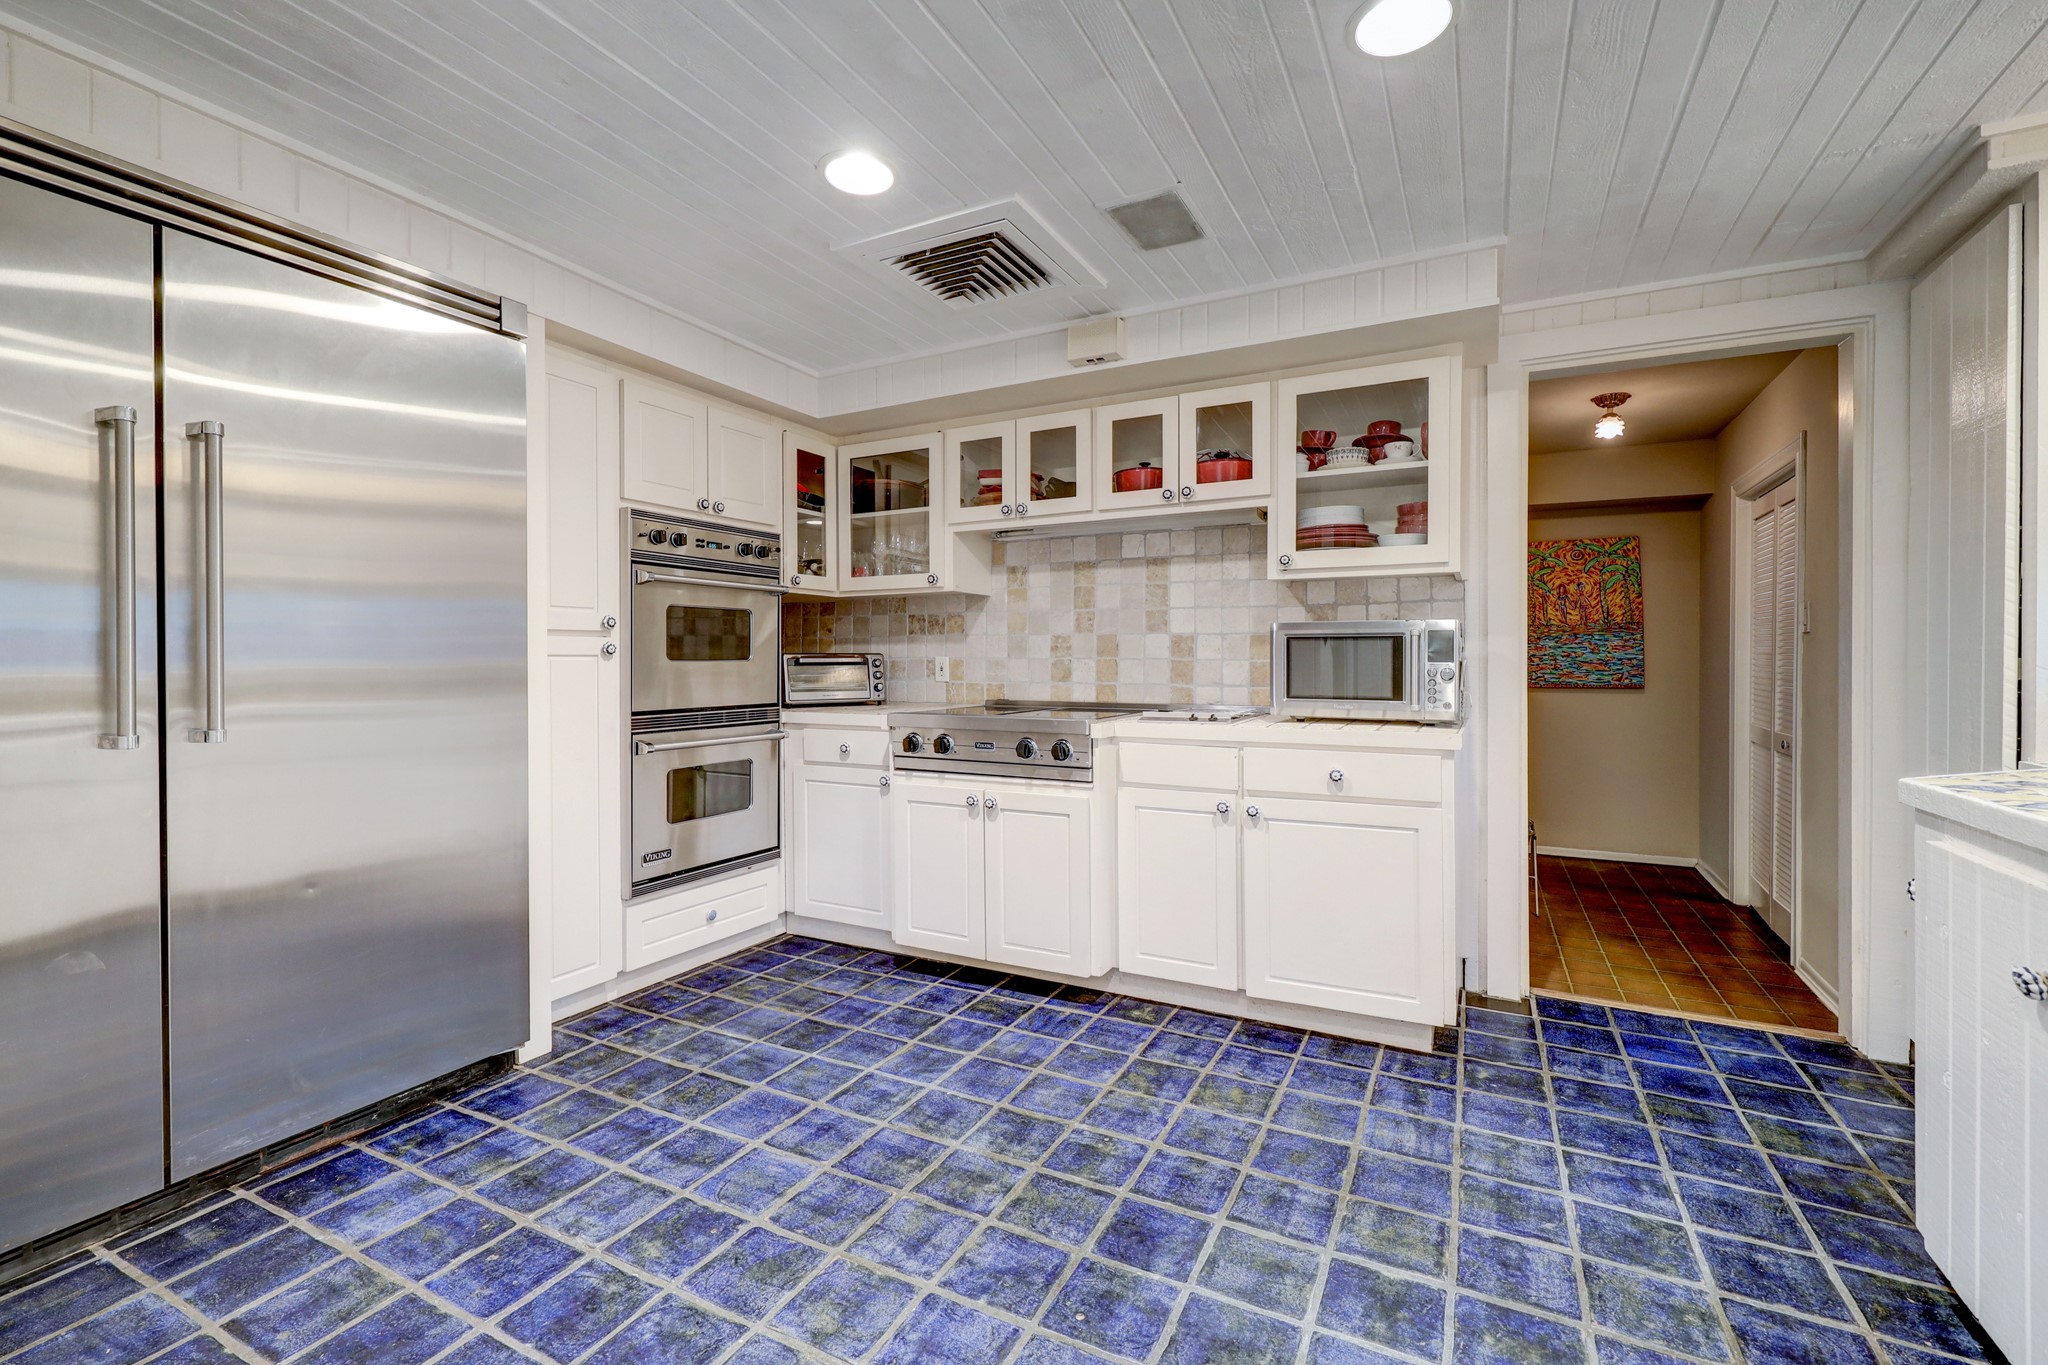 Another view of the kitchen with Viking side-by-side refrigerator, cook top and double wall ovens.